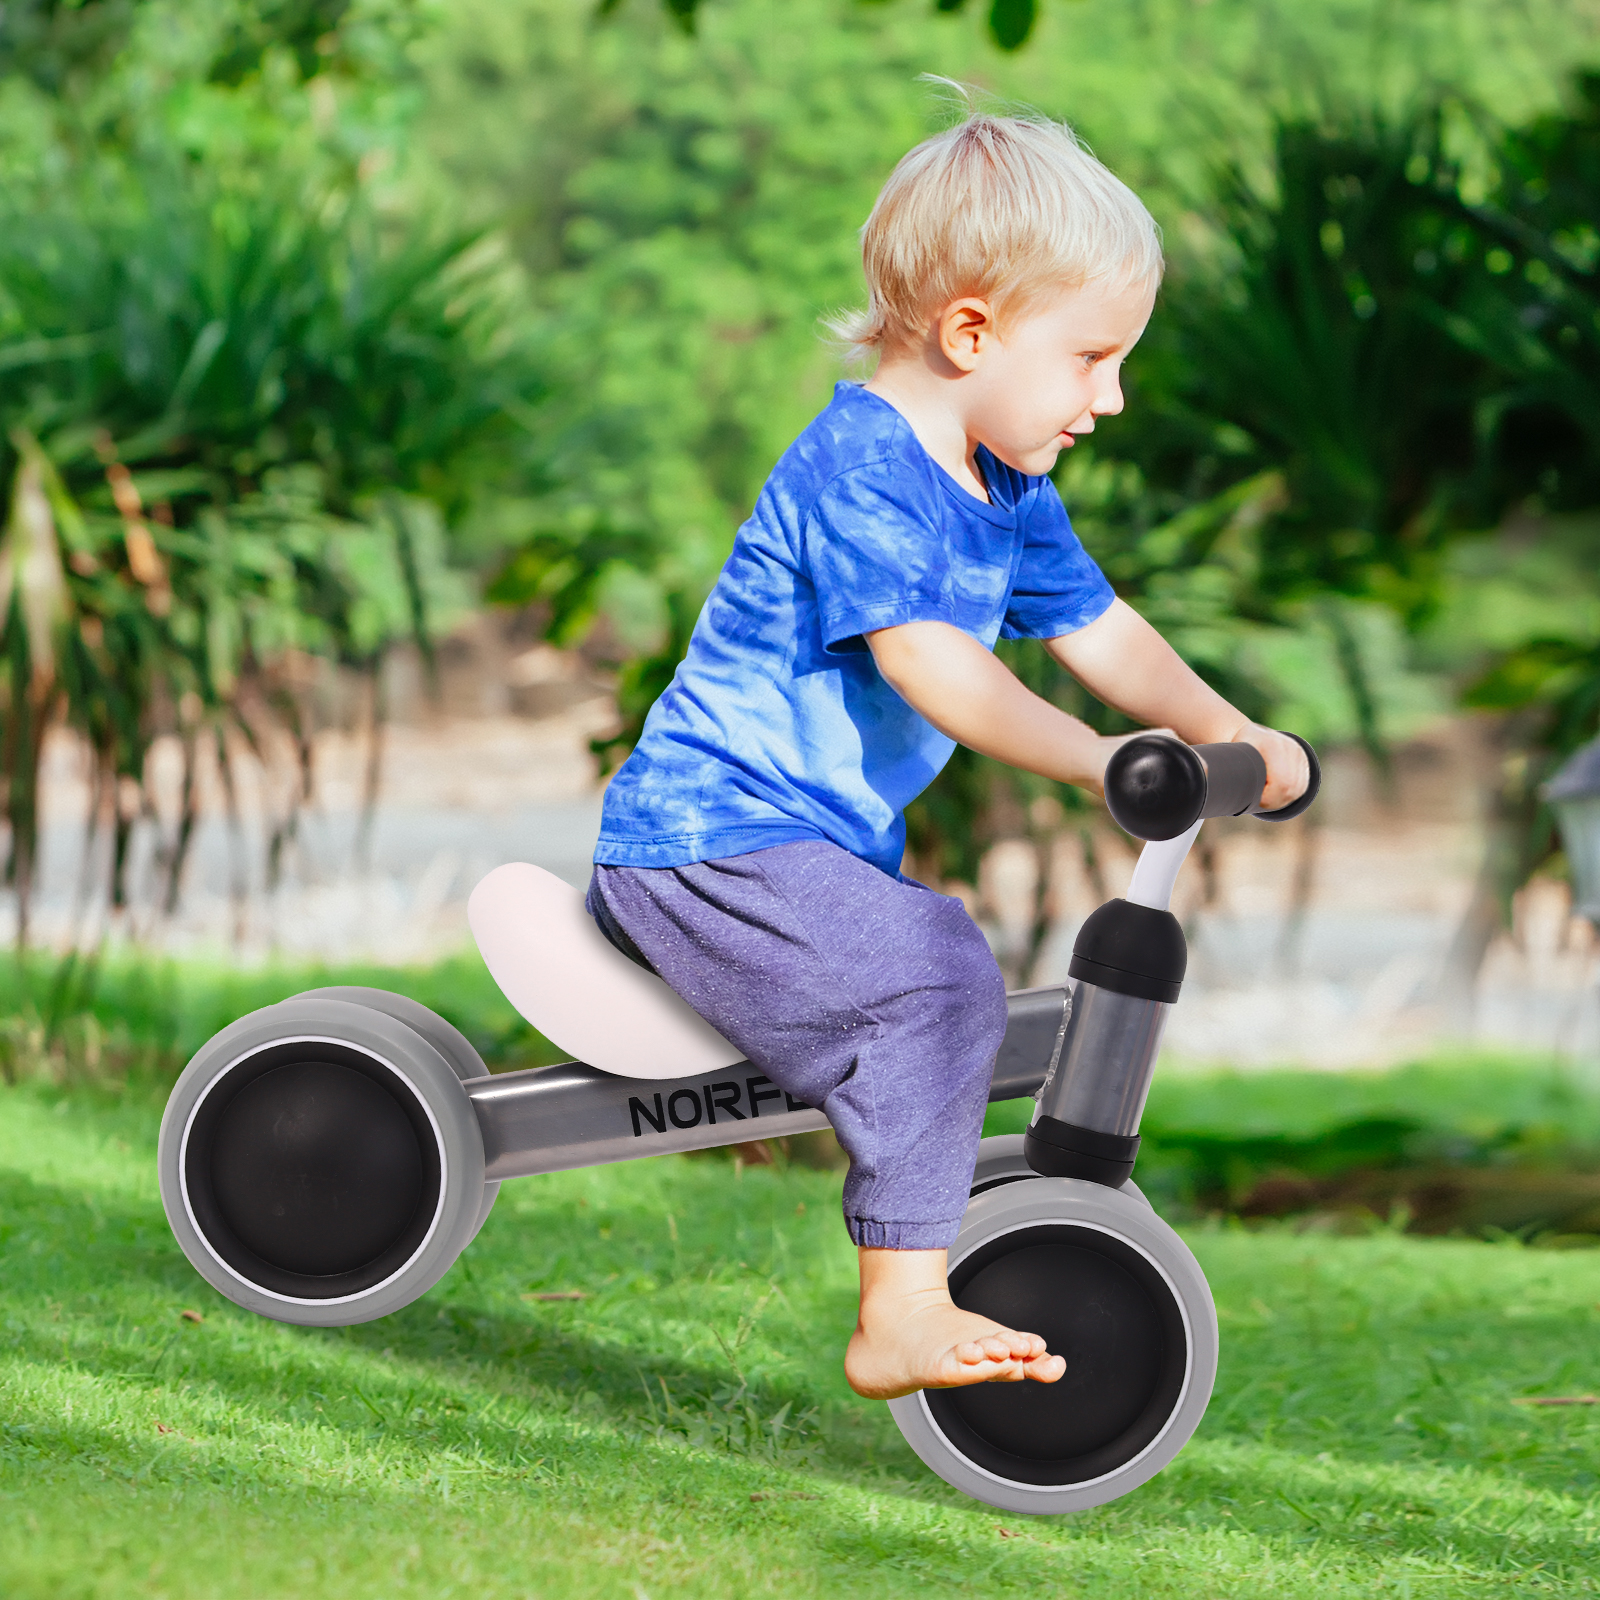 Norflx Kids Balance Bike Childrens Ride On Toy Baby Push Bicycle - SILVER